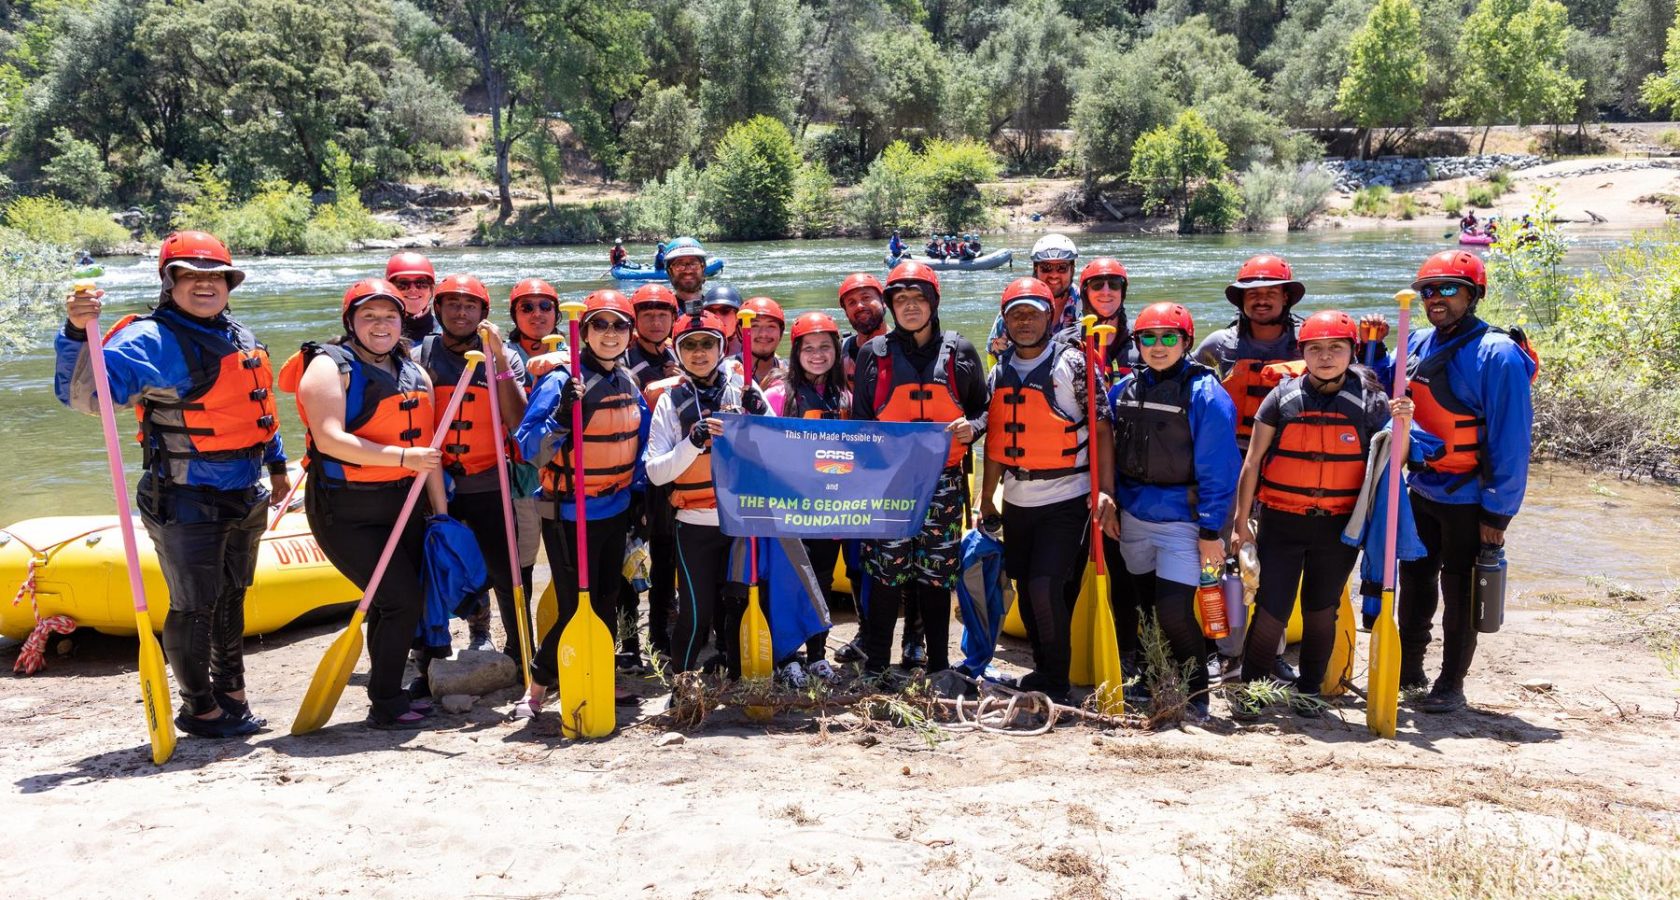 A group of rafting guests and OARS guides stand ready for a rafting trip on the South Fork of the American River